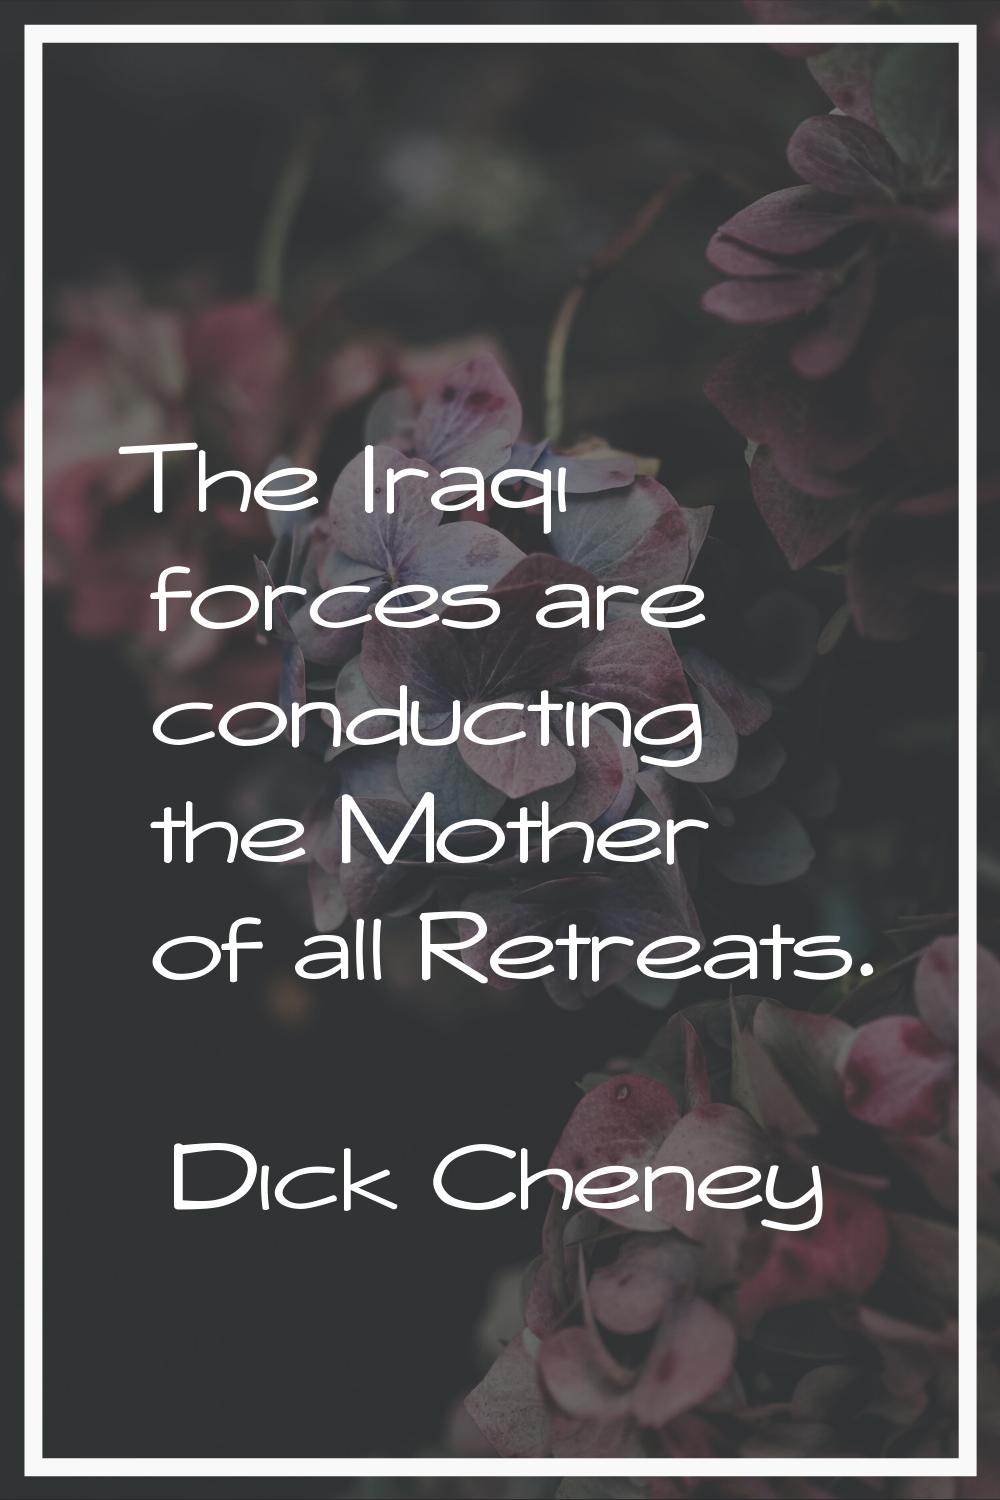 The Iraqi forces are conducting the Mother of all Retreats.